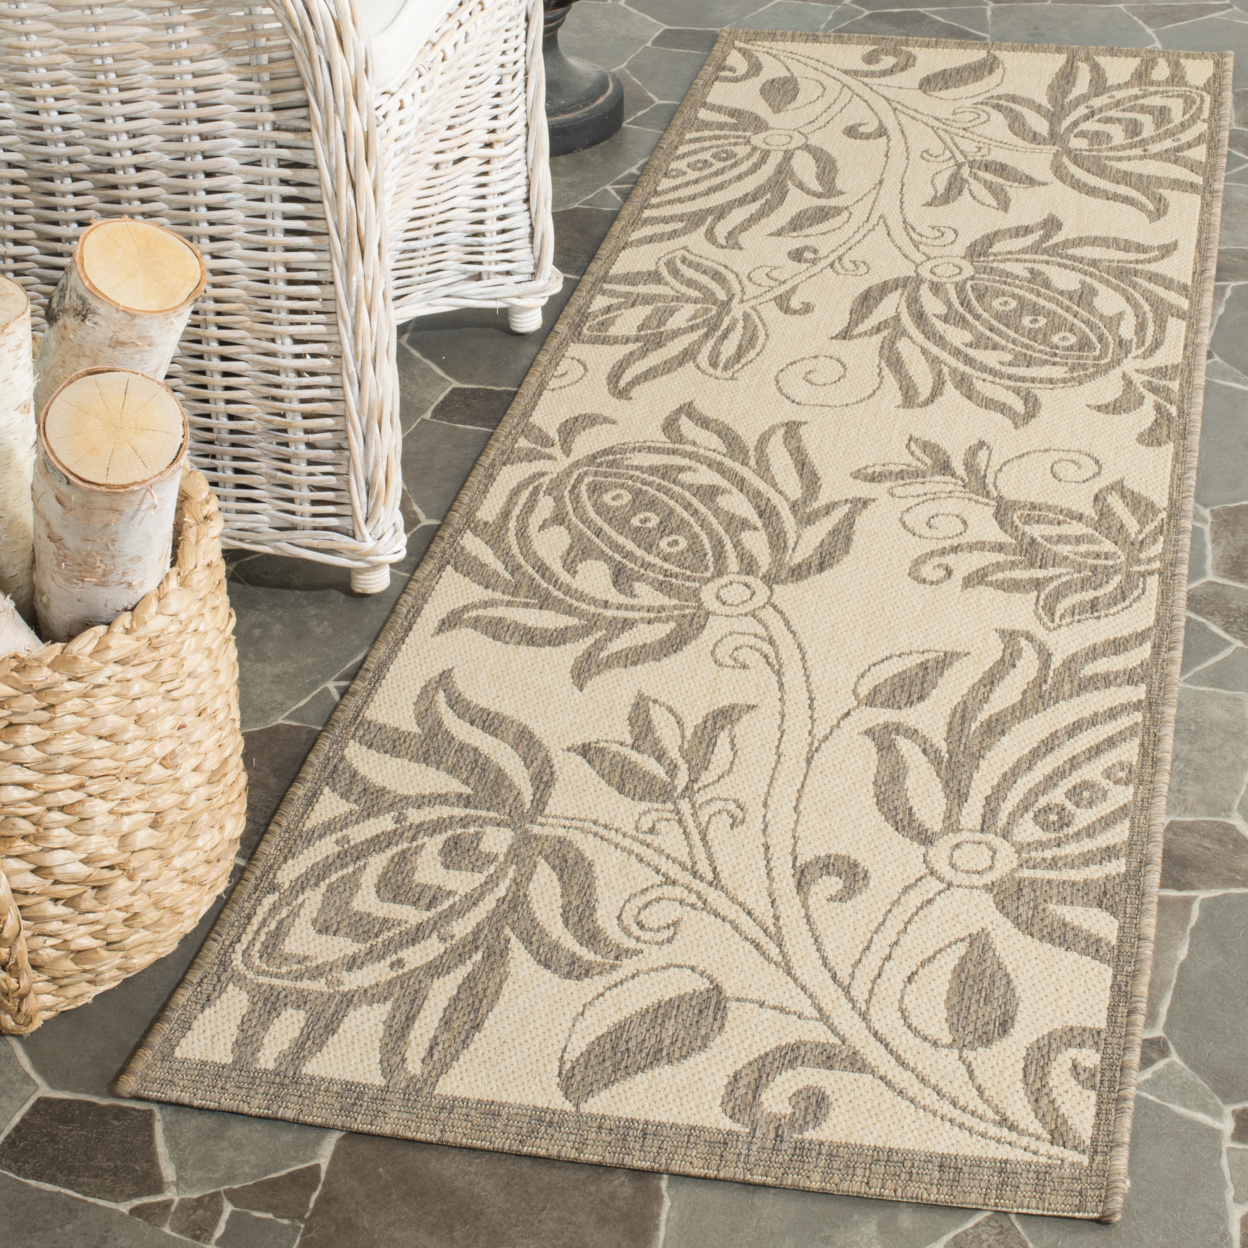 SAFAVIEH Outdoor CY2961-3001 Courtyard Natural / Brown Rug - 8' X 11'